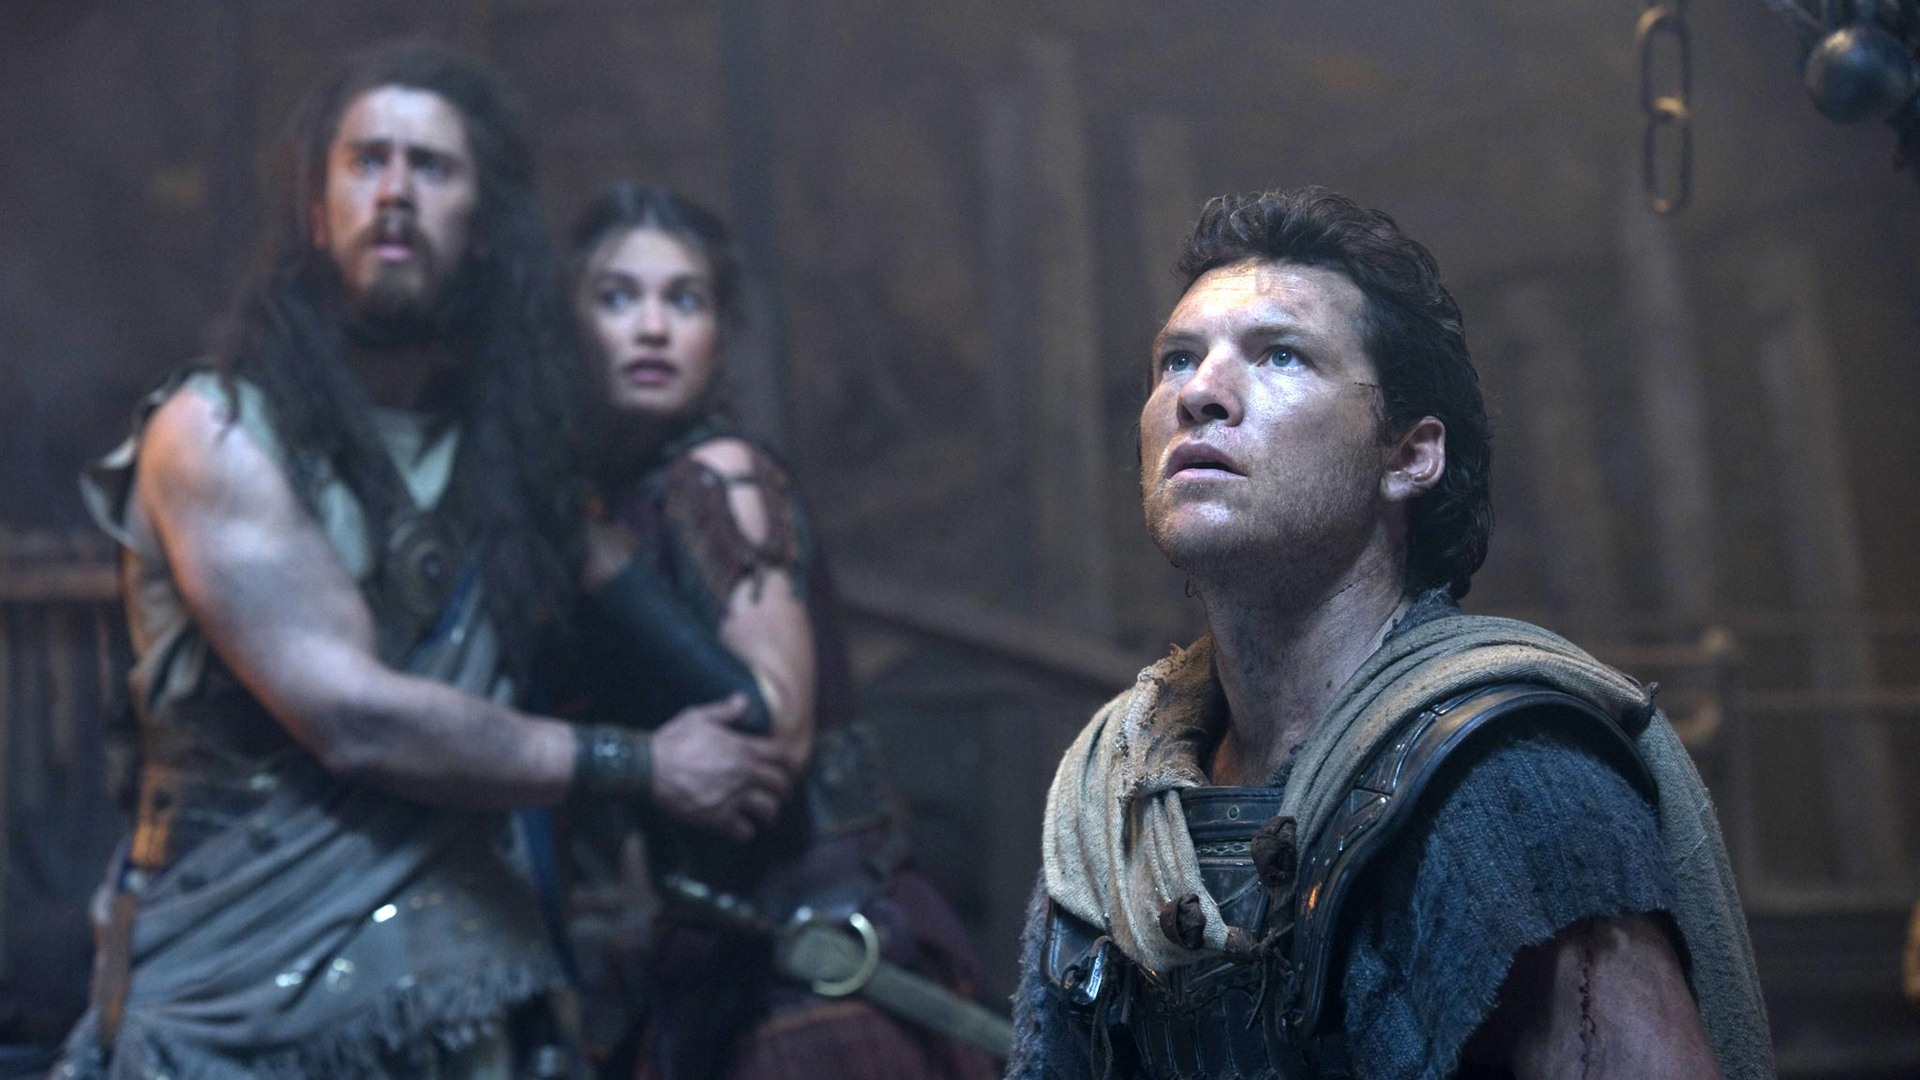 Wrath of the Titans HD Wallpapers #4 - 1920x1080